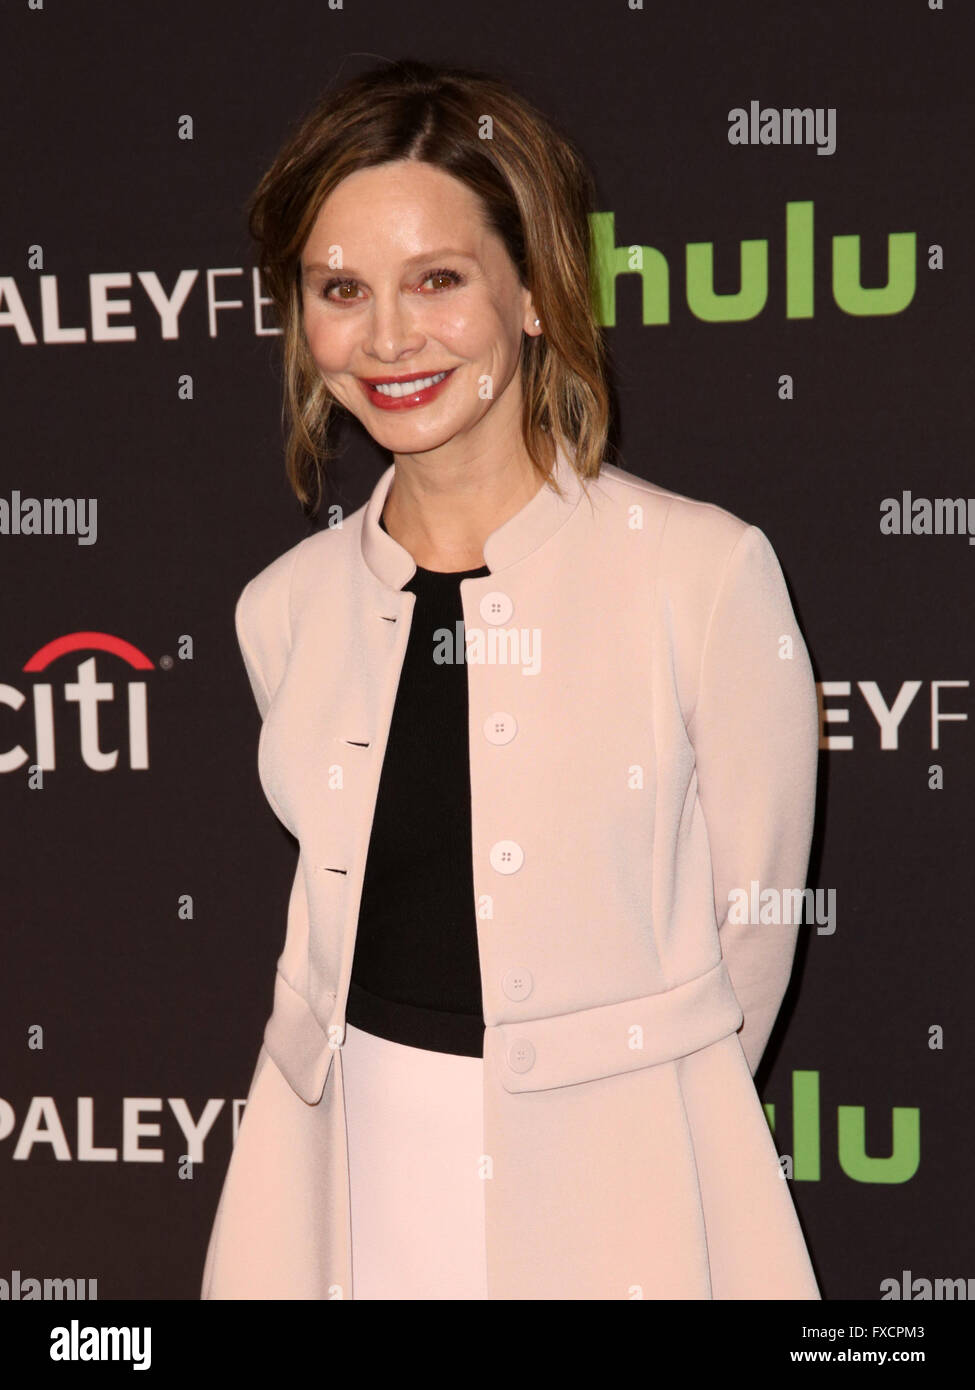 Celebrities attend 33rd annual PaleyFest Los Angeles 'Supergirl' at The Dolby Theater.  Featuring: Calista Flockhart Where: Los Angeles, California, United States When: 14 Mar 2016 Stock Photo